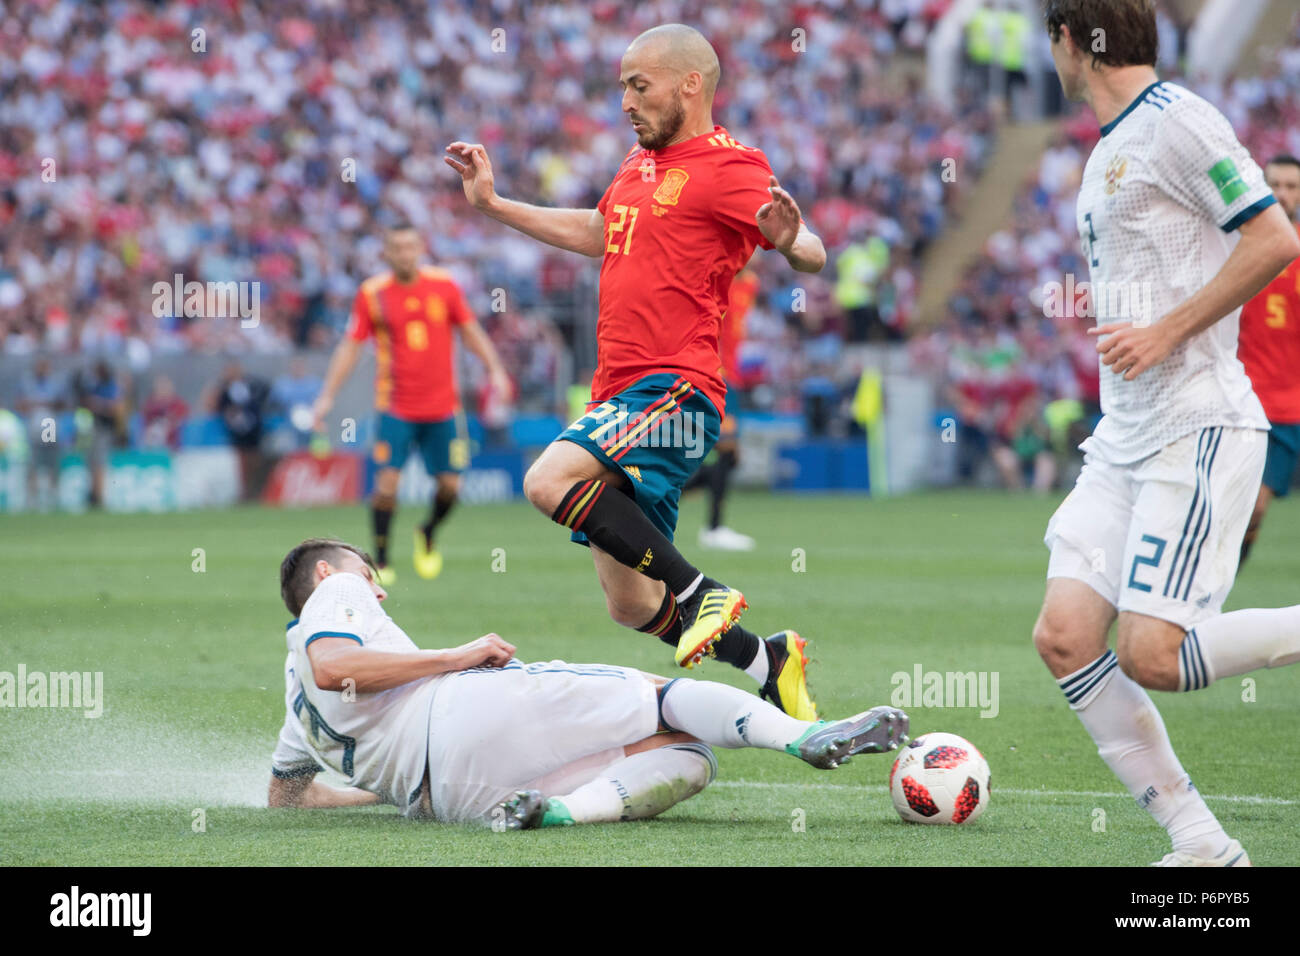 Moscow, Russland. 01st July, 2018. Ilya KUTEPOV (un., RUS) versus David SILVA (ESP), Action, duels, Spain (ESP) - Russia (RUS) 3: 4 iE, Round of 16, Game 51, on 01.07.2018 in Moscow; Football World Cup 2018 in Russia from 14.06. - 15.07.2018. | usage worldwide Credit: dpa/Alamy Live News Stock Photo